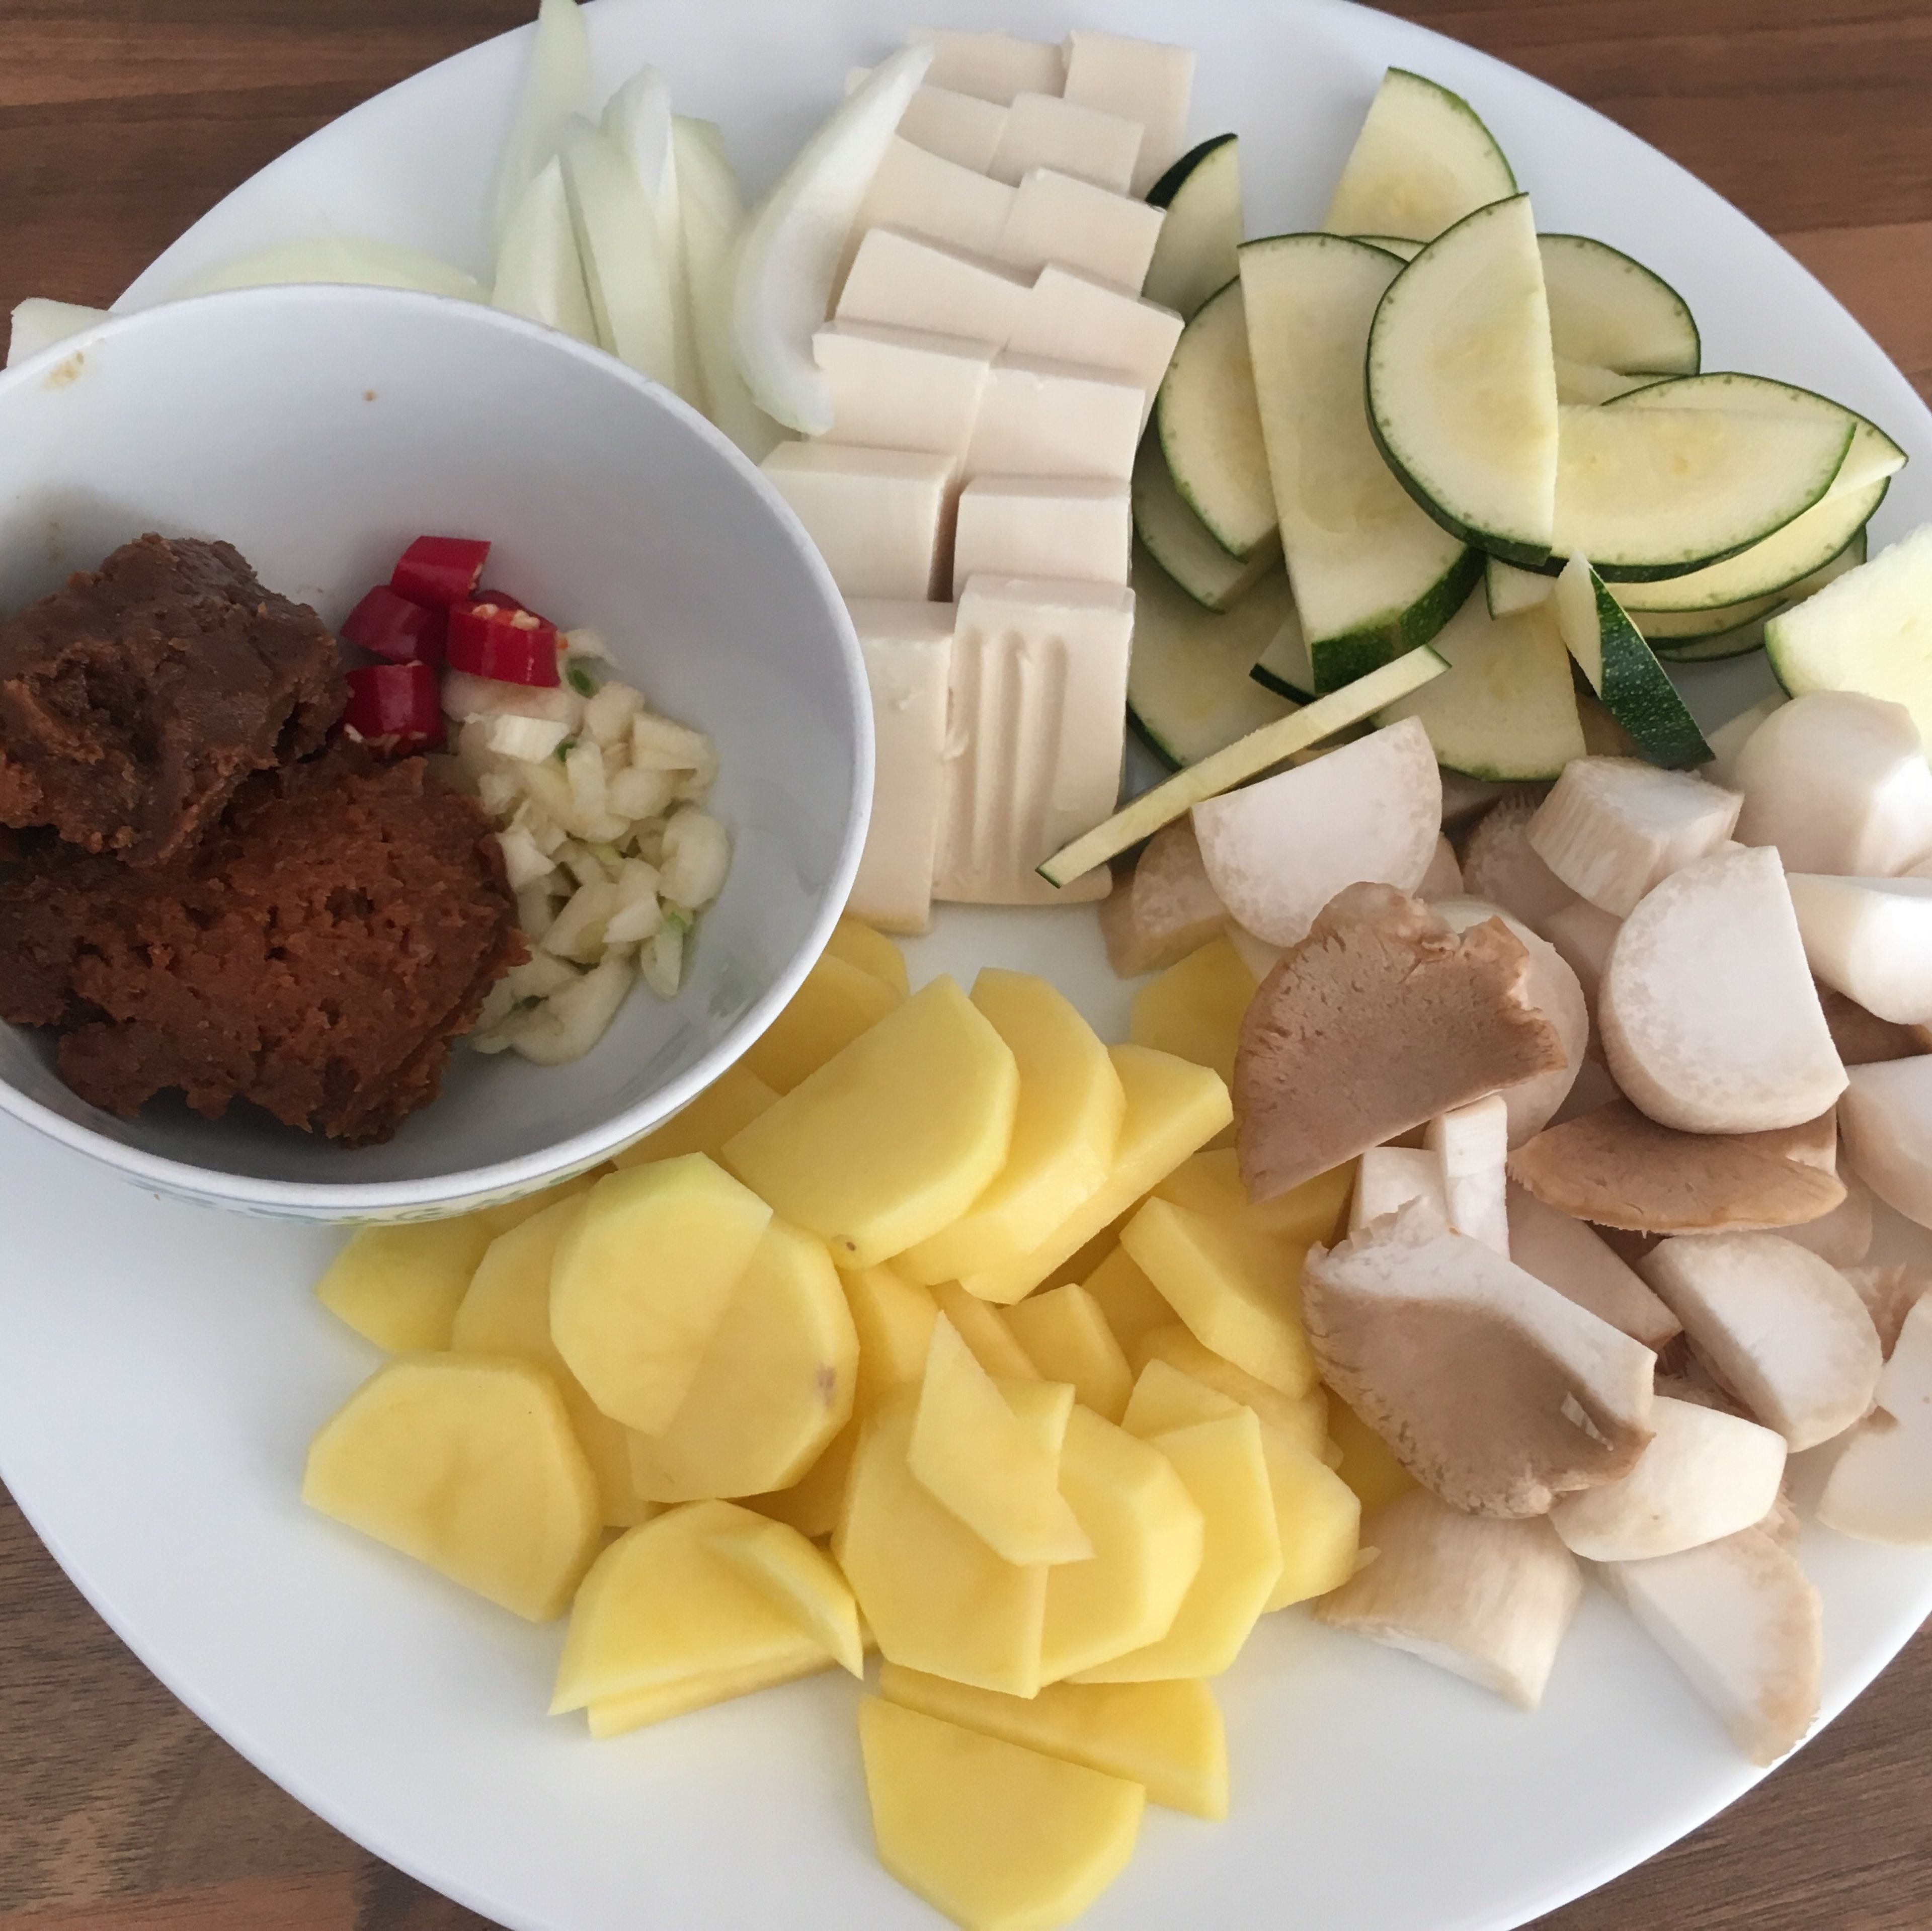 Dice the garlic cloves. Cut the potato and zucchini in medium thin pieces. Cut the onion and mushrooms.